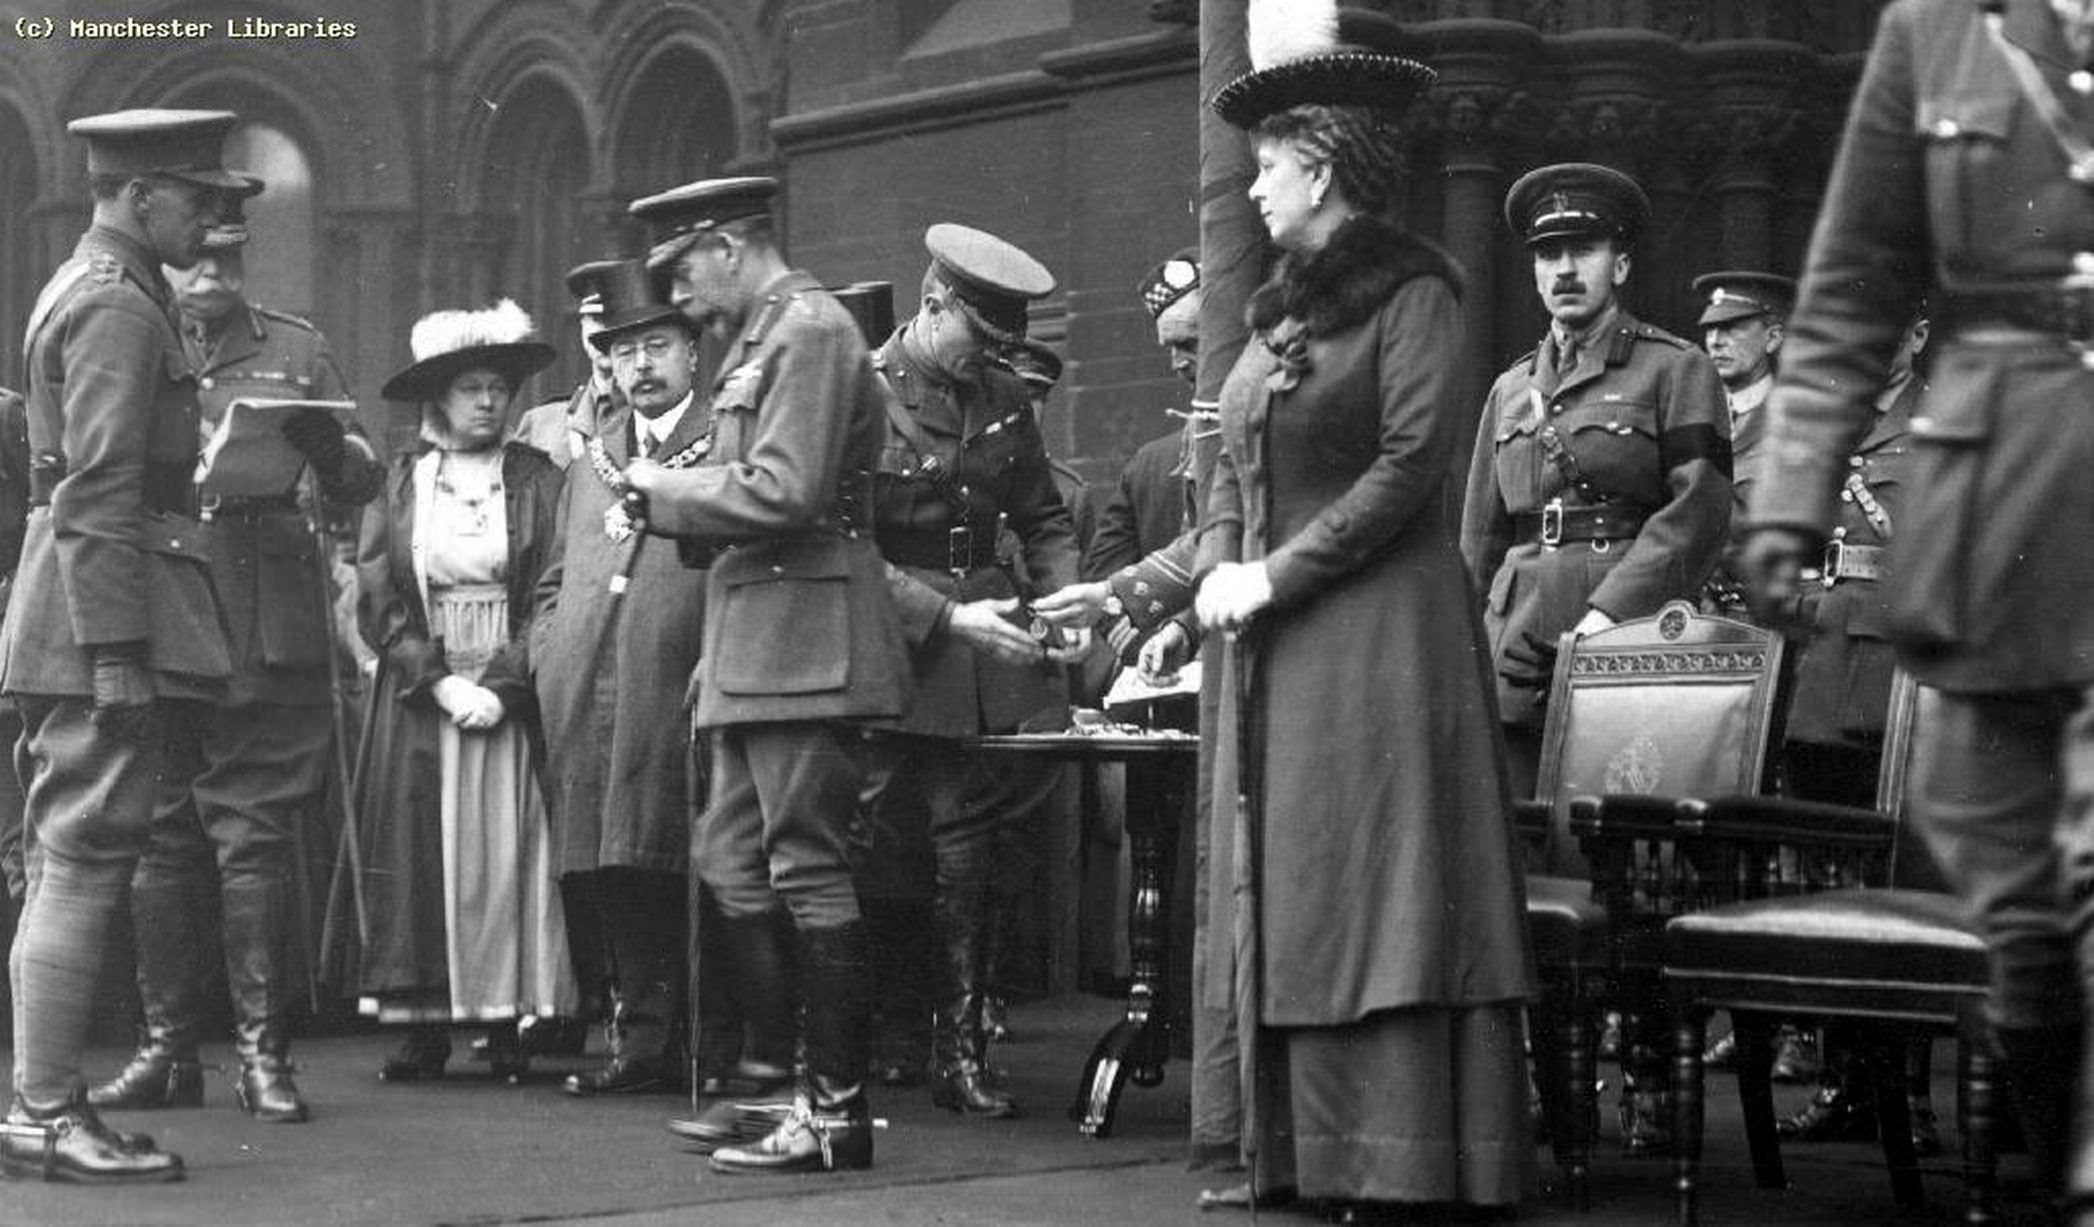 King George V at Manchester Town Hall